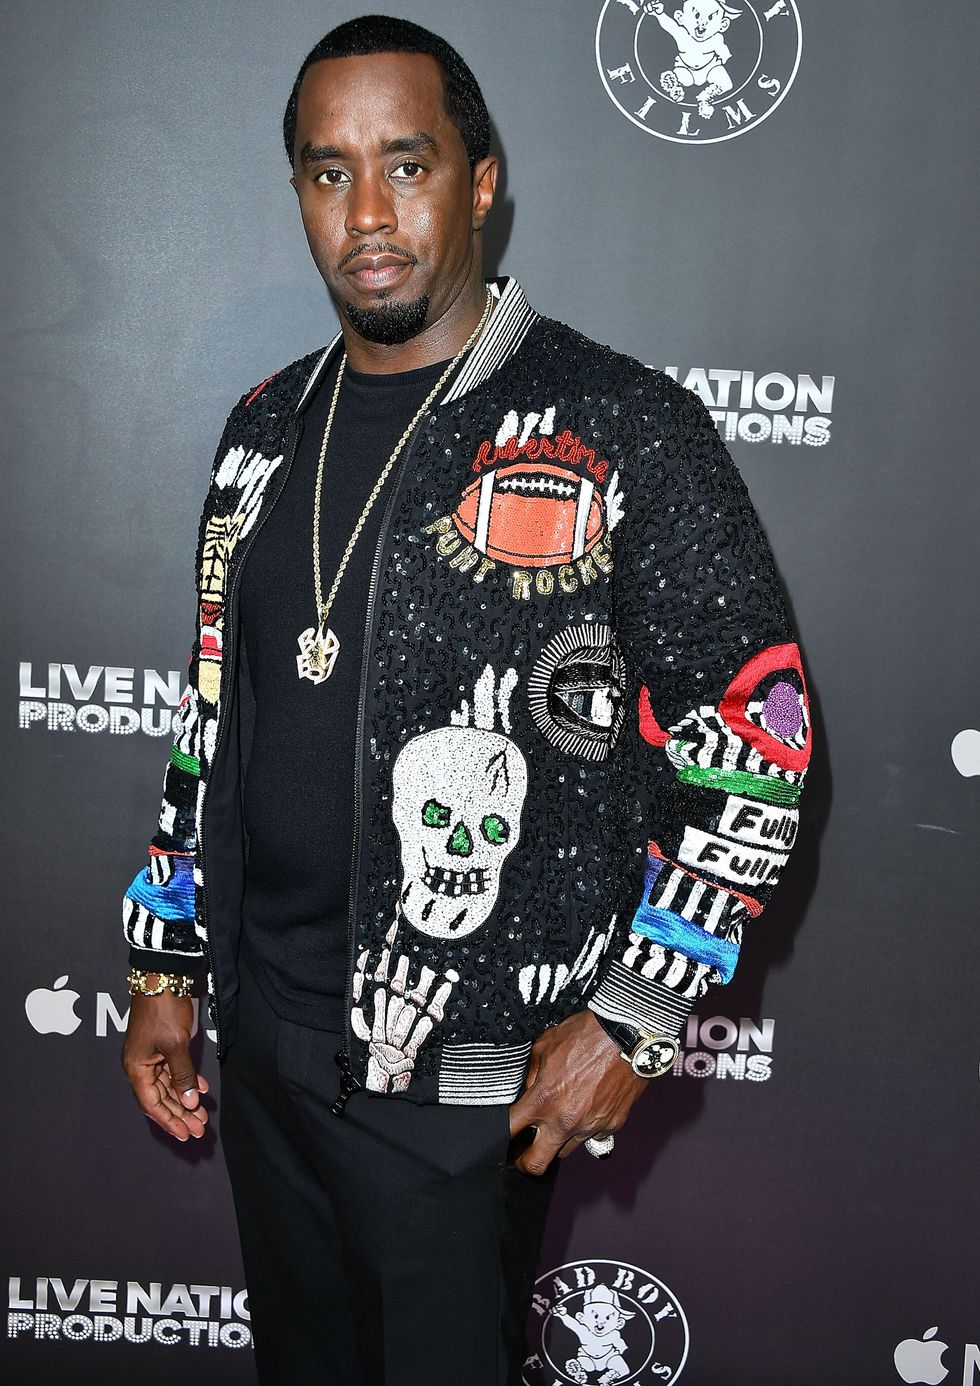 p diddy on the red carpet in a sequin bomber jacket